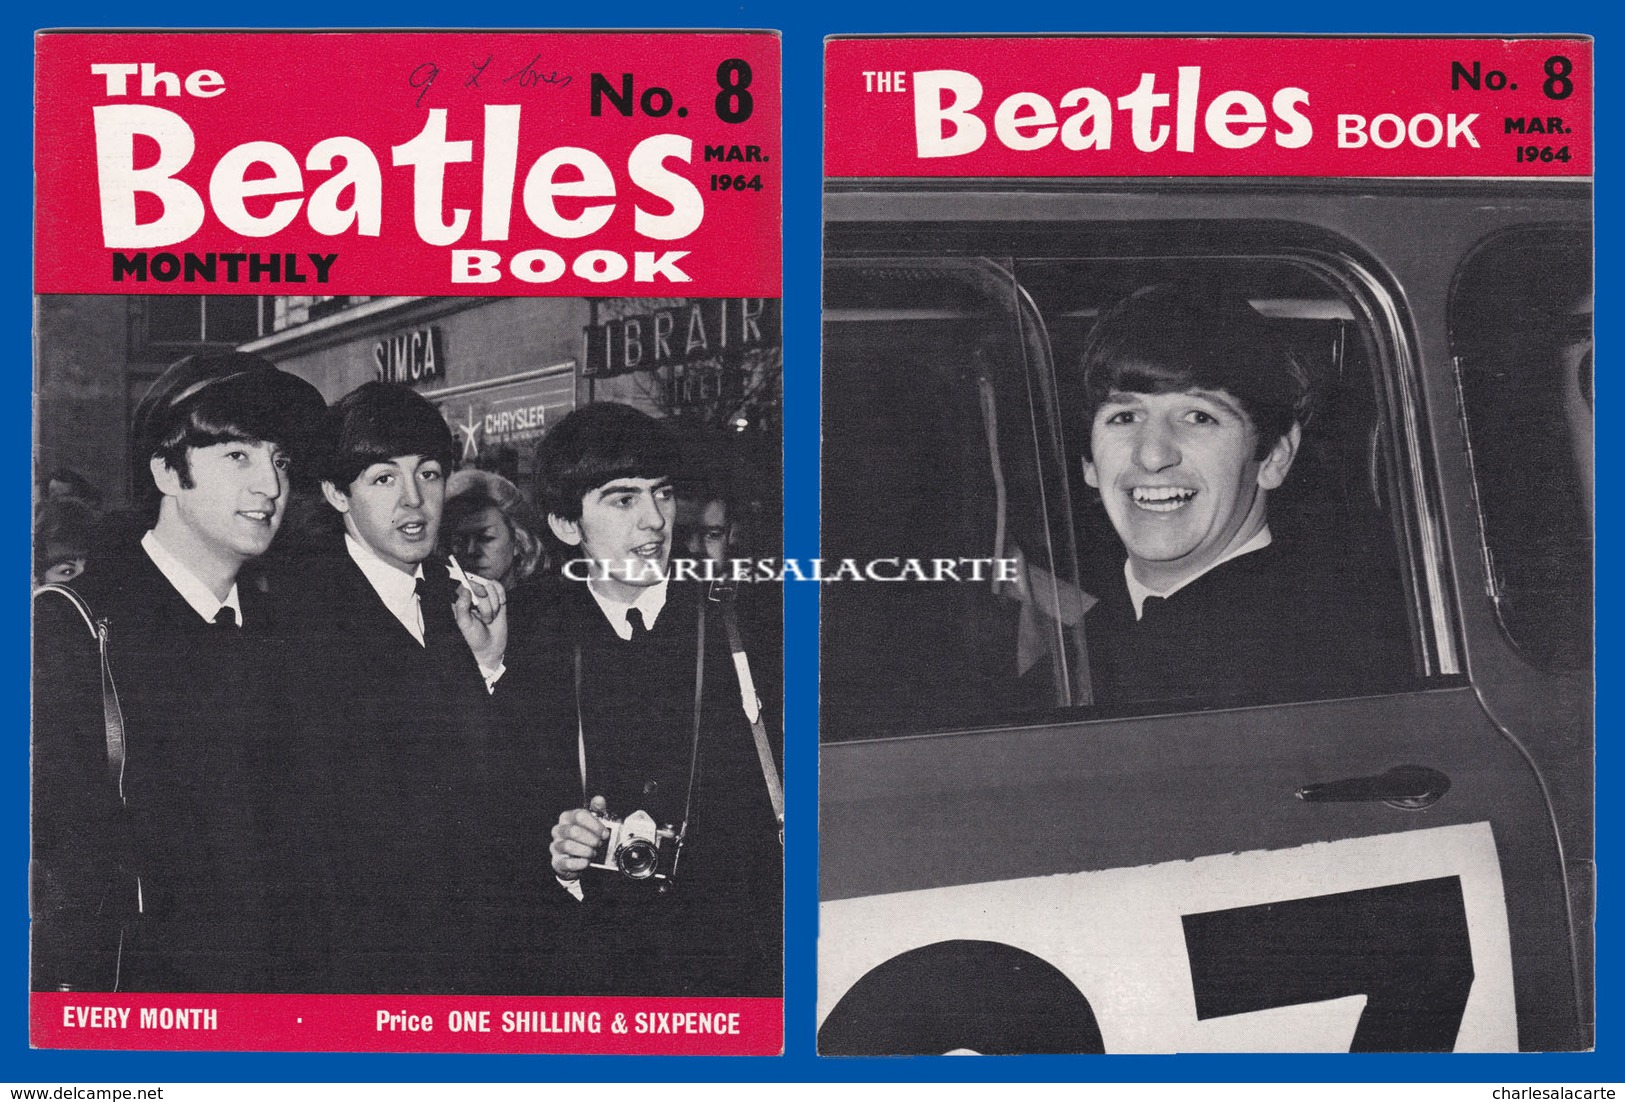 1964 MARCH THE BEATLES MONTHLY BOOK No.8 AUTHENTIC SUBERB CONDITION SEE THE SCAN - Entretenimiento